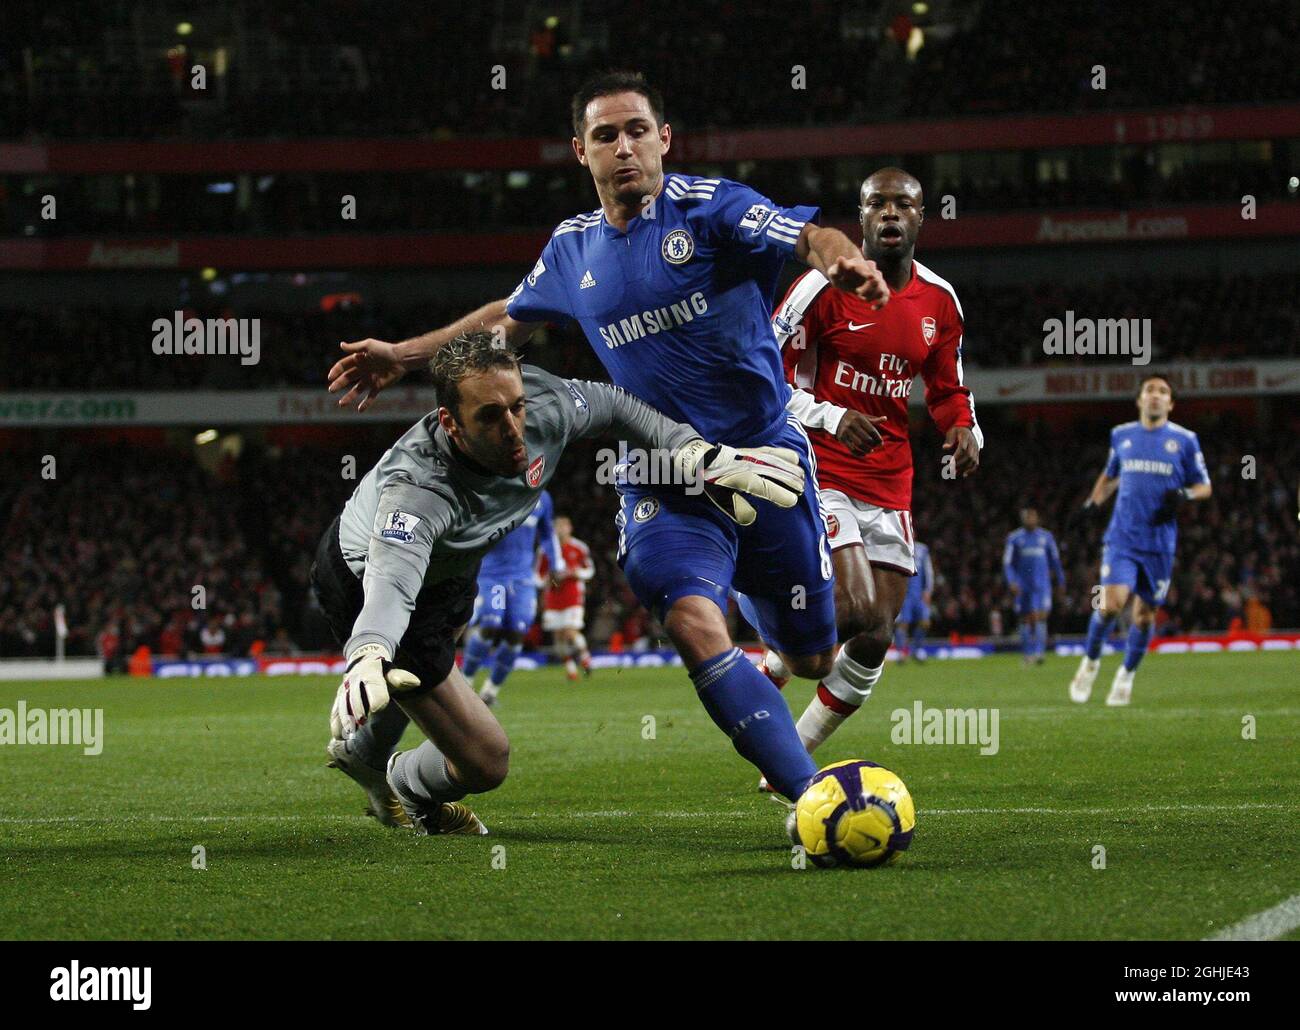 Arsenal's Manuel Almunia tussles with Chelsea's Frank Lampard during Barclays Premier League match between Arsenal and Chelsea at Emirates Stadium, London. Stock Photo